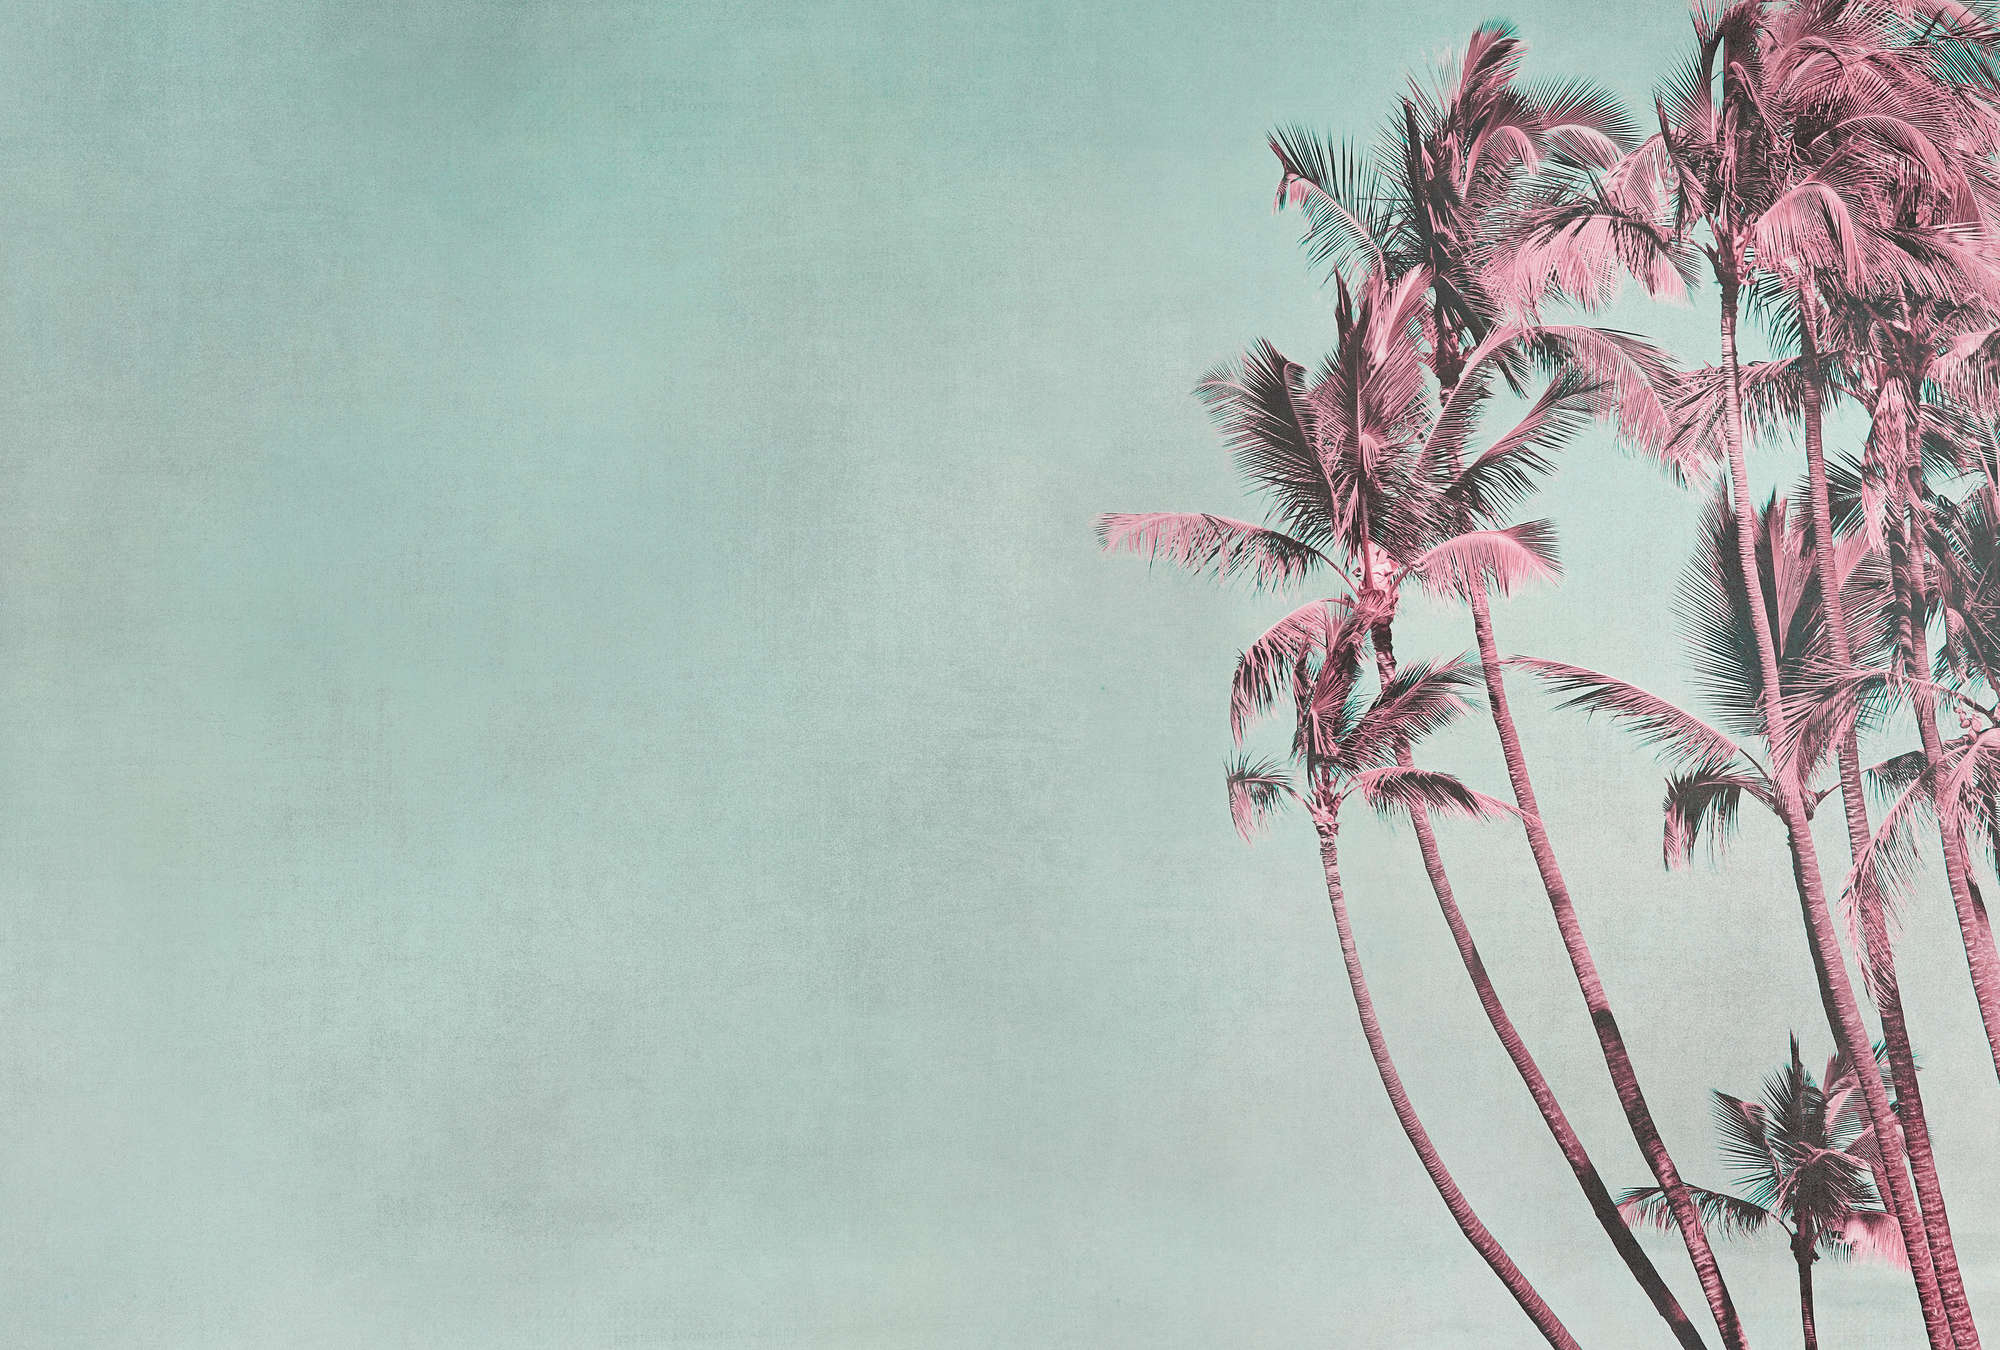             Tropical Breeze Palm Behang in Turquoise & Roze
        